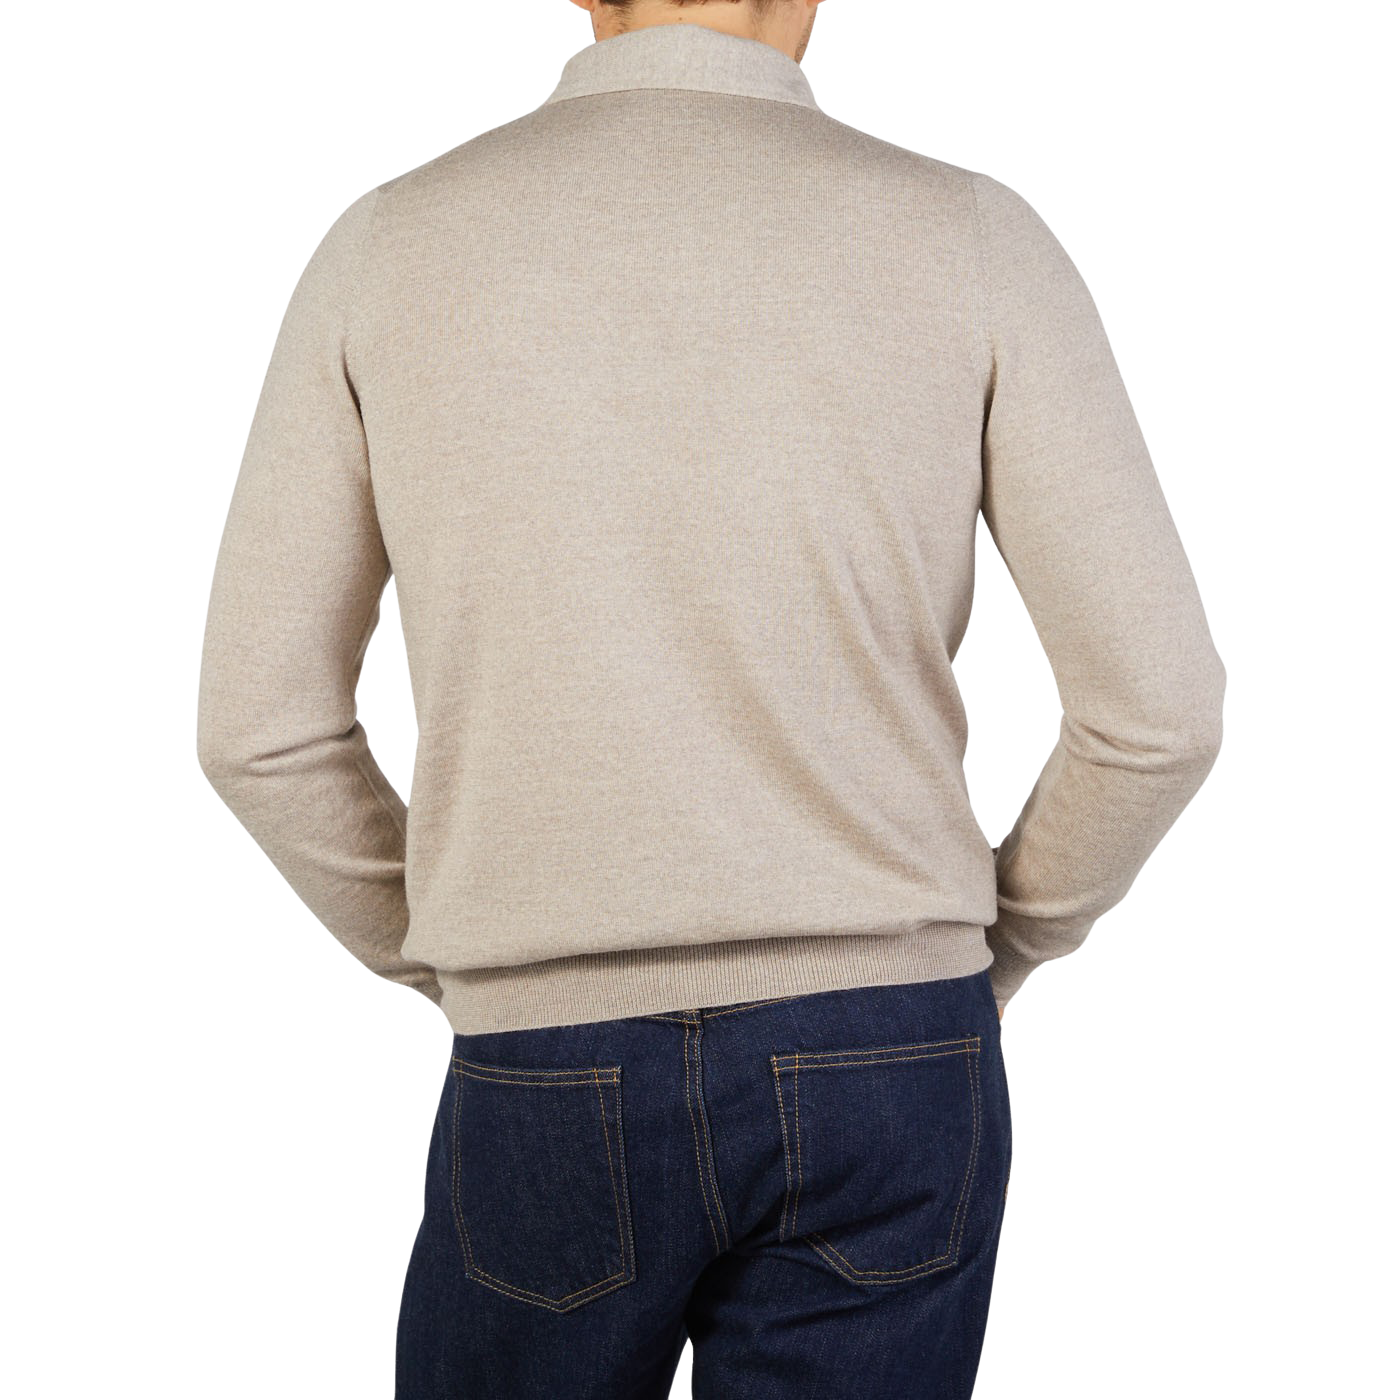 The back view of a man wearing a Gran Sasso Light Beige Merino Wool One-Piece Collar Polo Shirt and jeans.